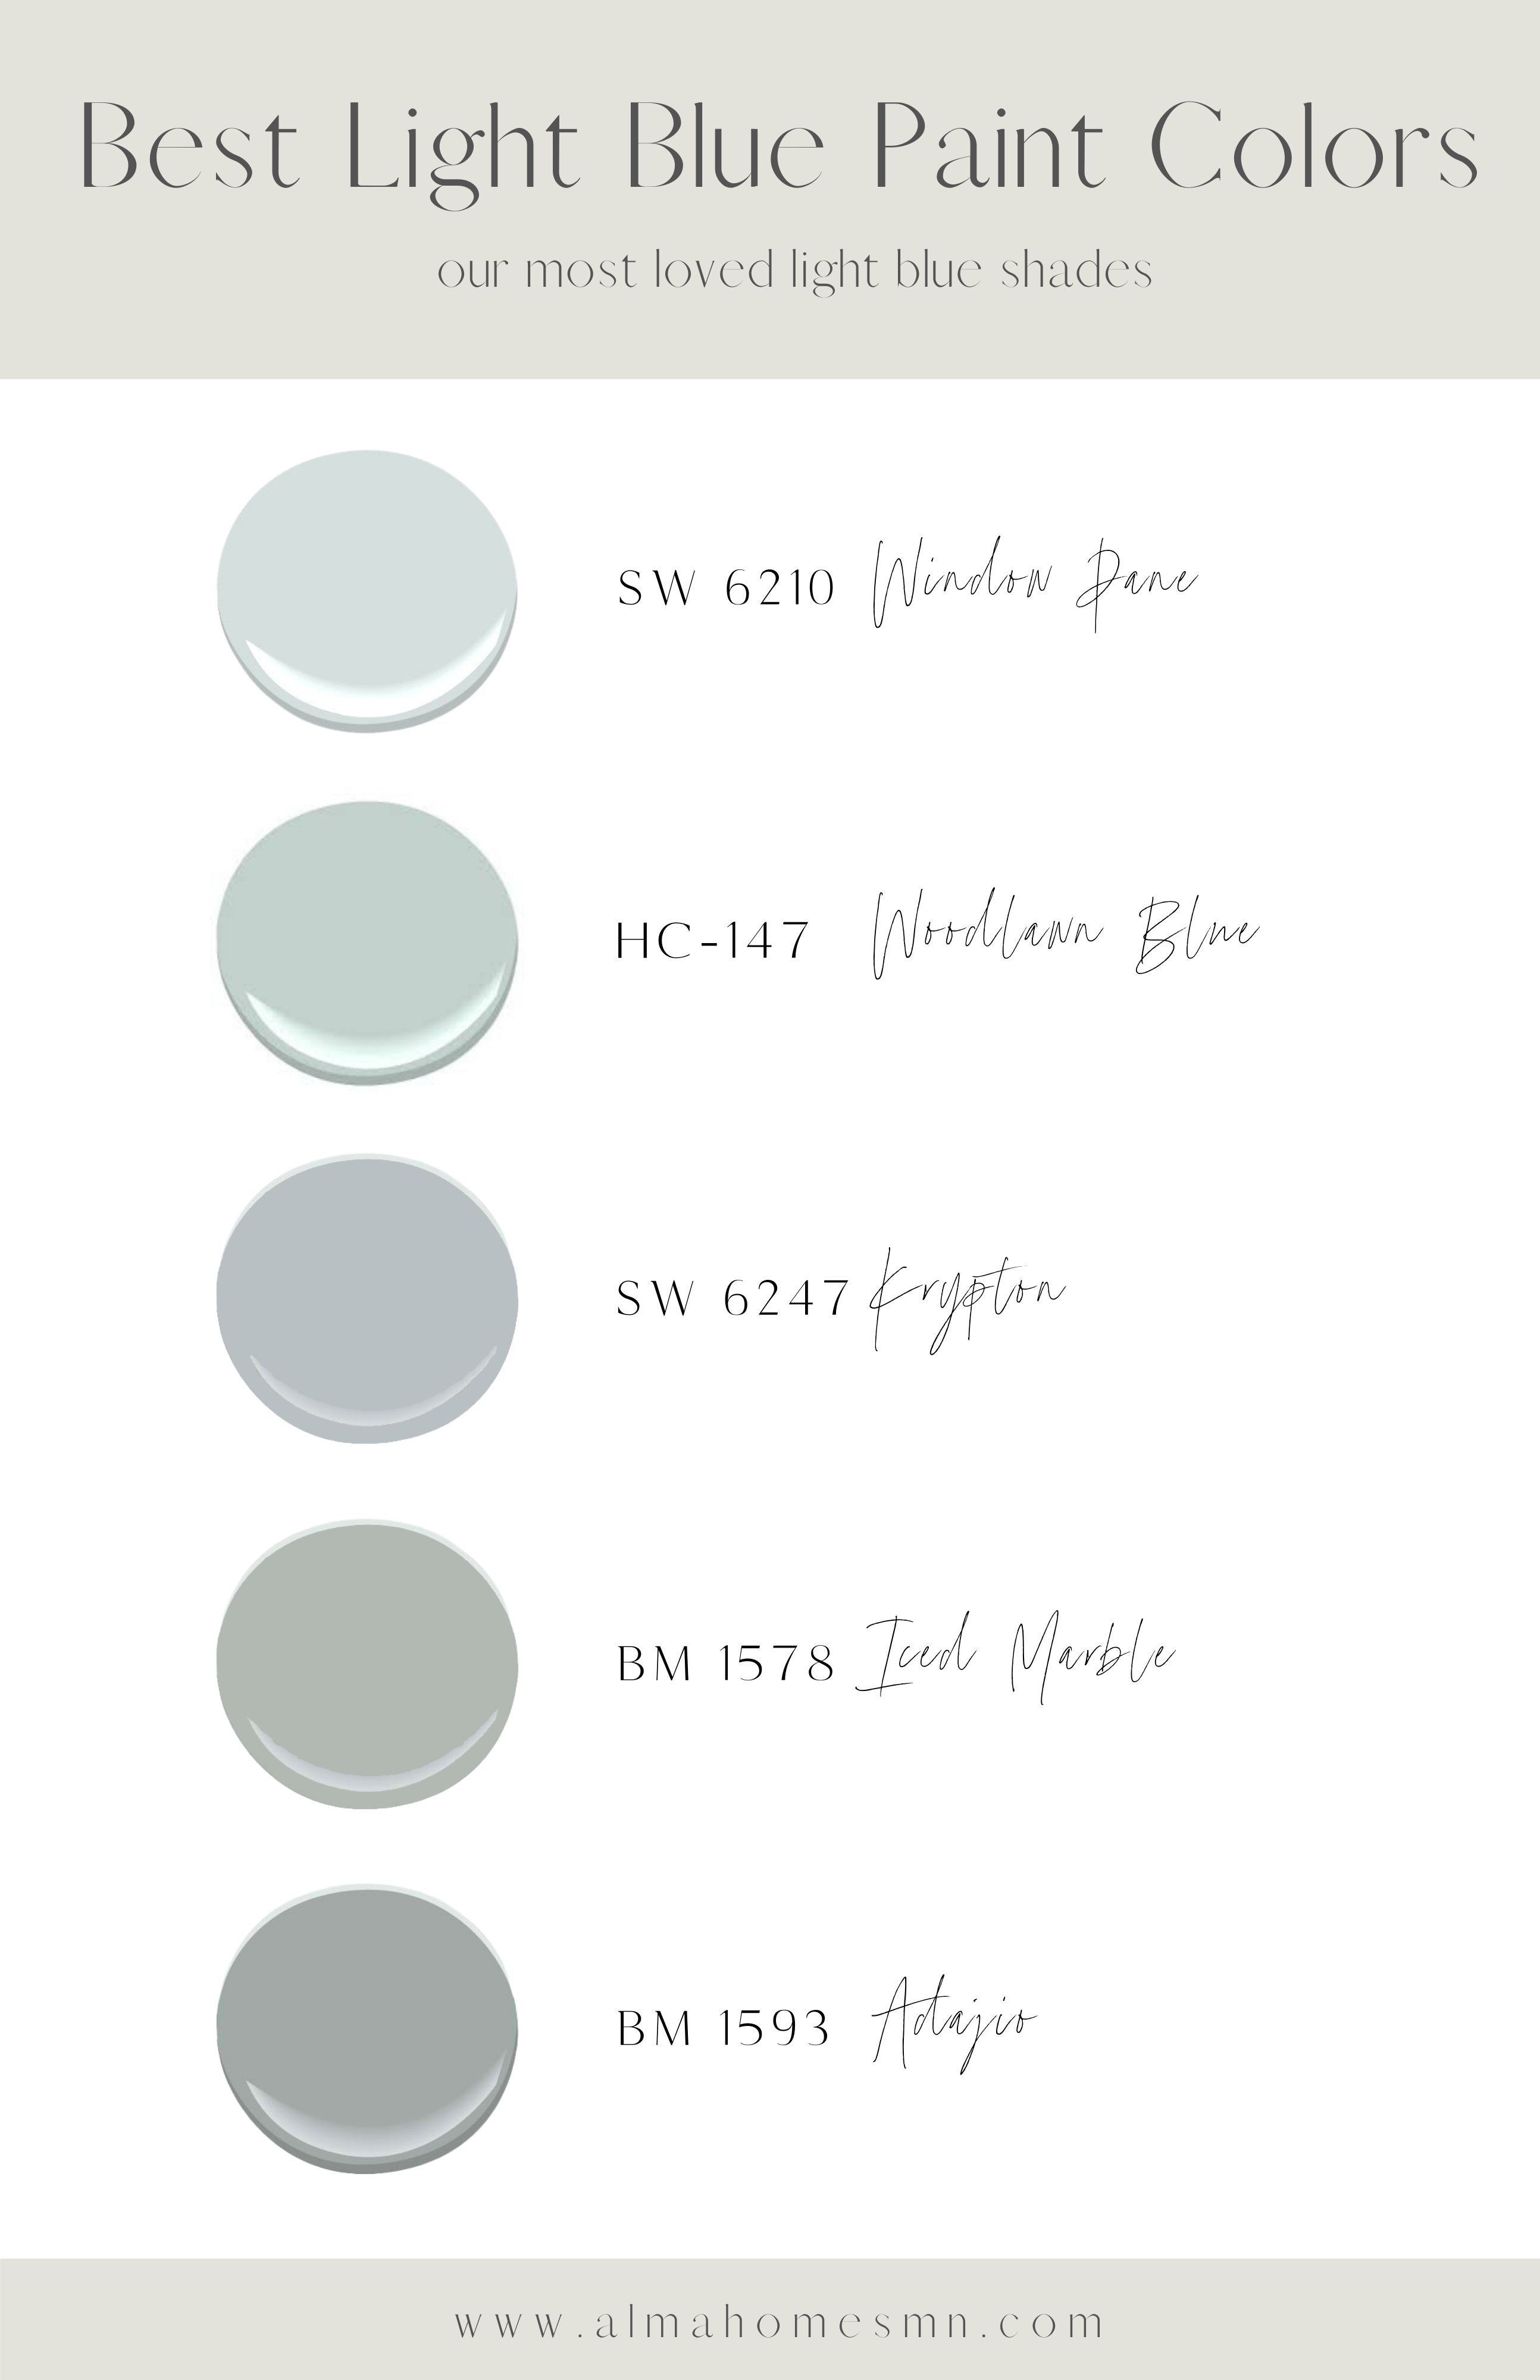 Keeping Light in Mind When Choosing Paint Colors - Jerry Enos Painting